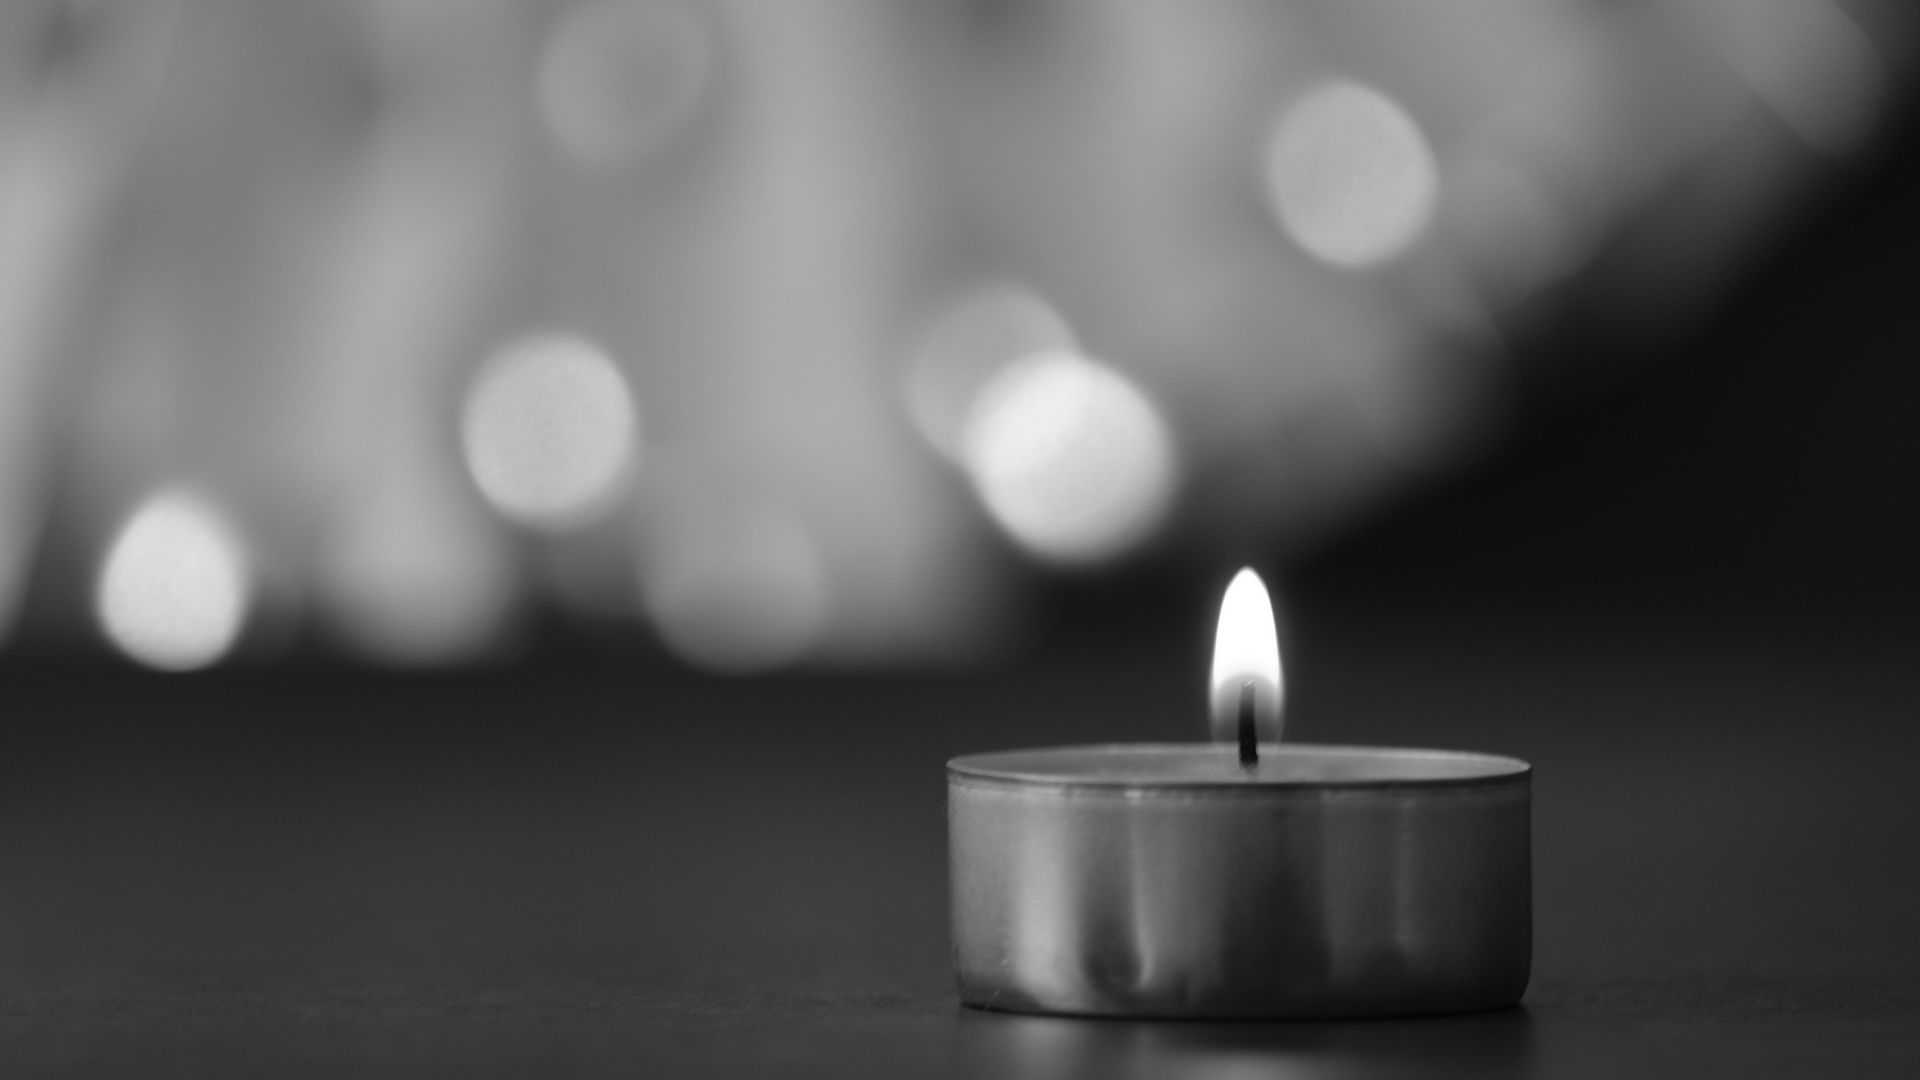 Download wallpaper 1920x1080 candle, fire, bw full hd, hdtv, fhd, 1080p ...